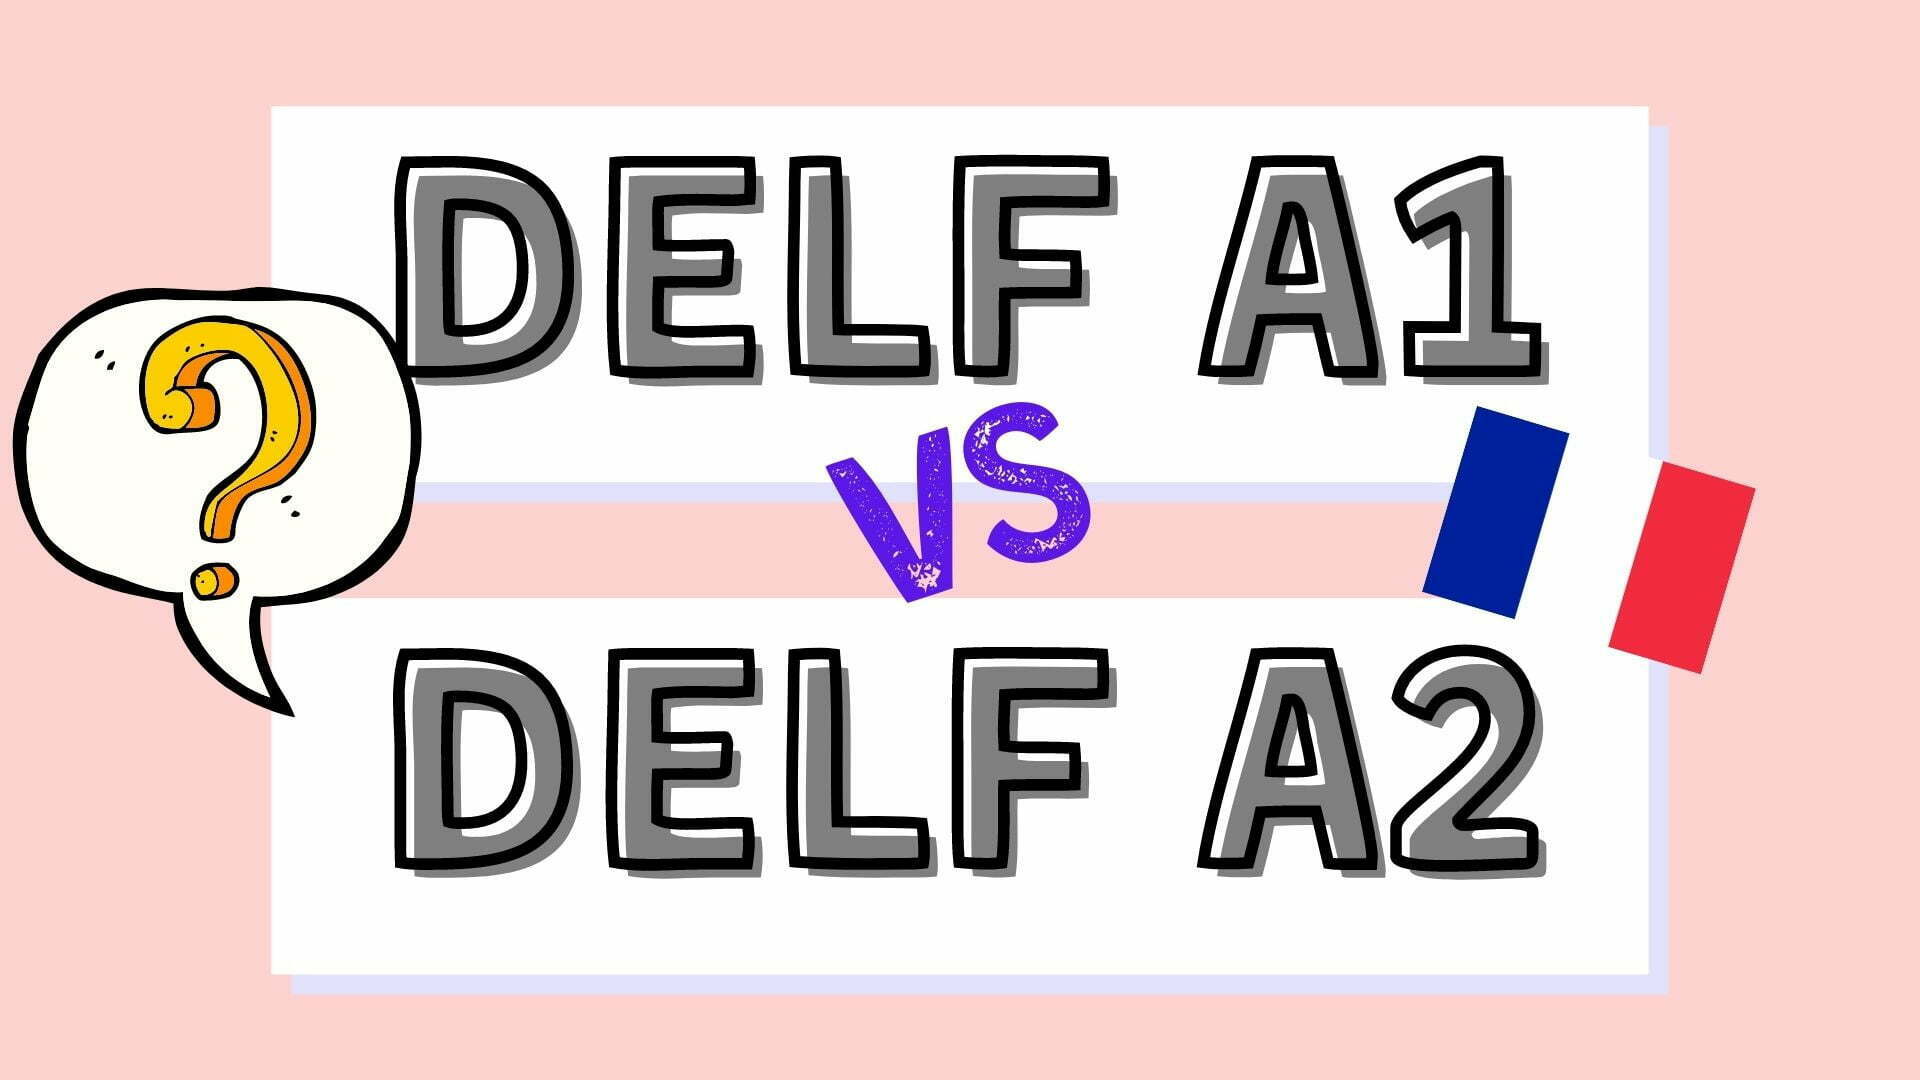 Differences between DELF A1 and A2